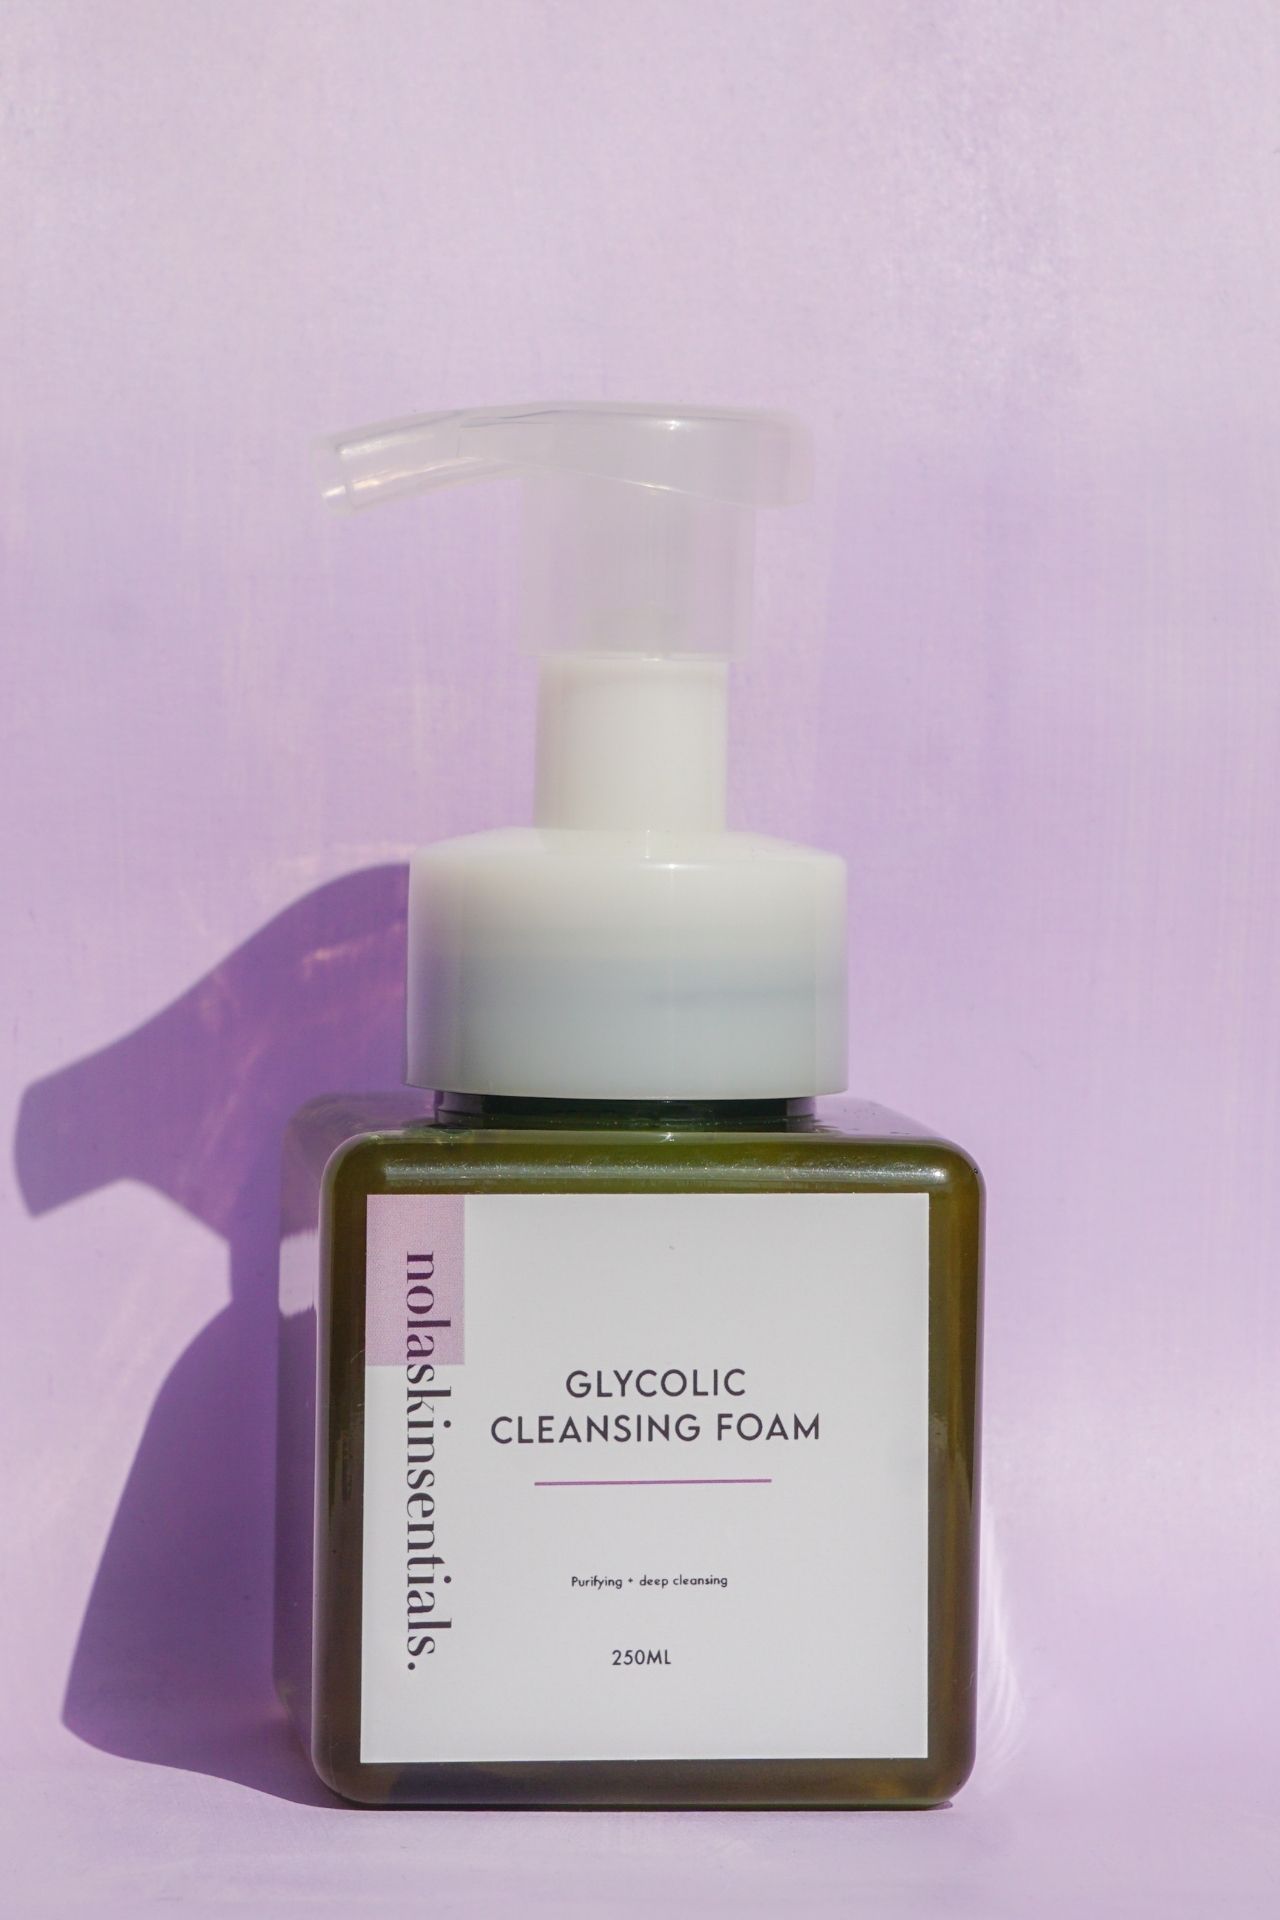 NolaSkinsentials Glycolic Cleansing Foam from Gimme the Good Stuff